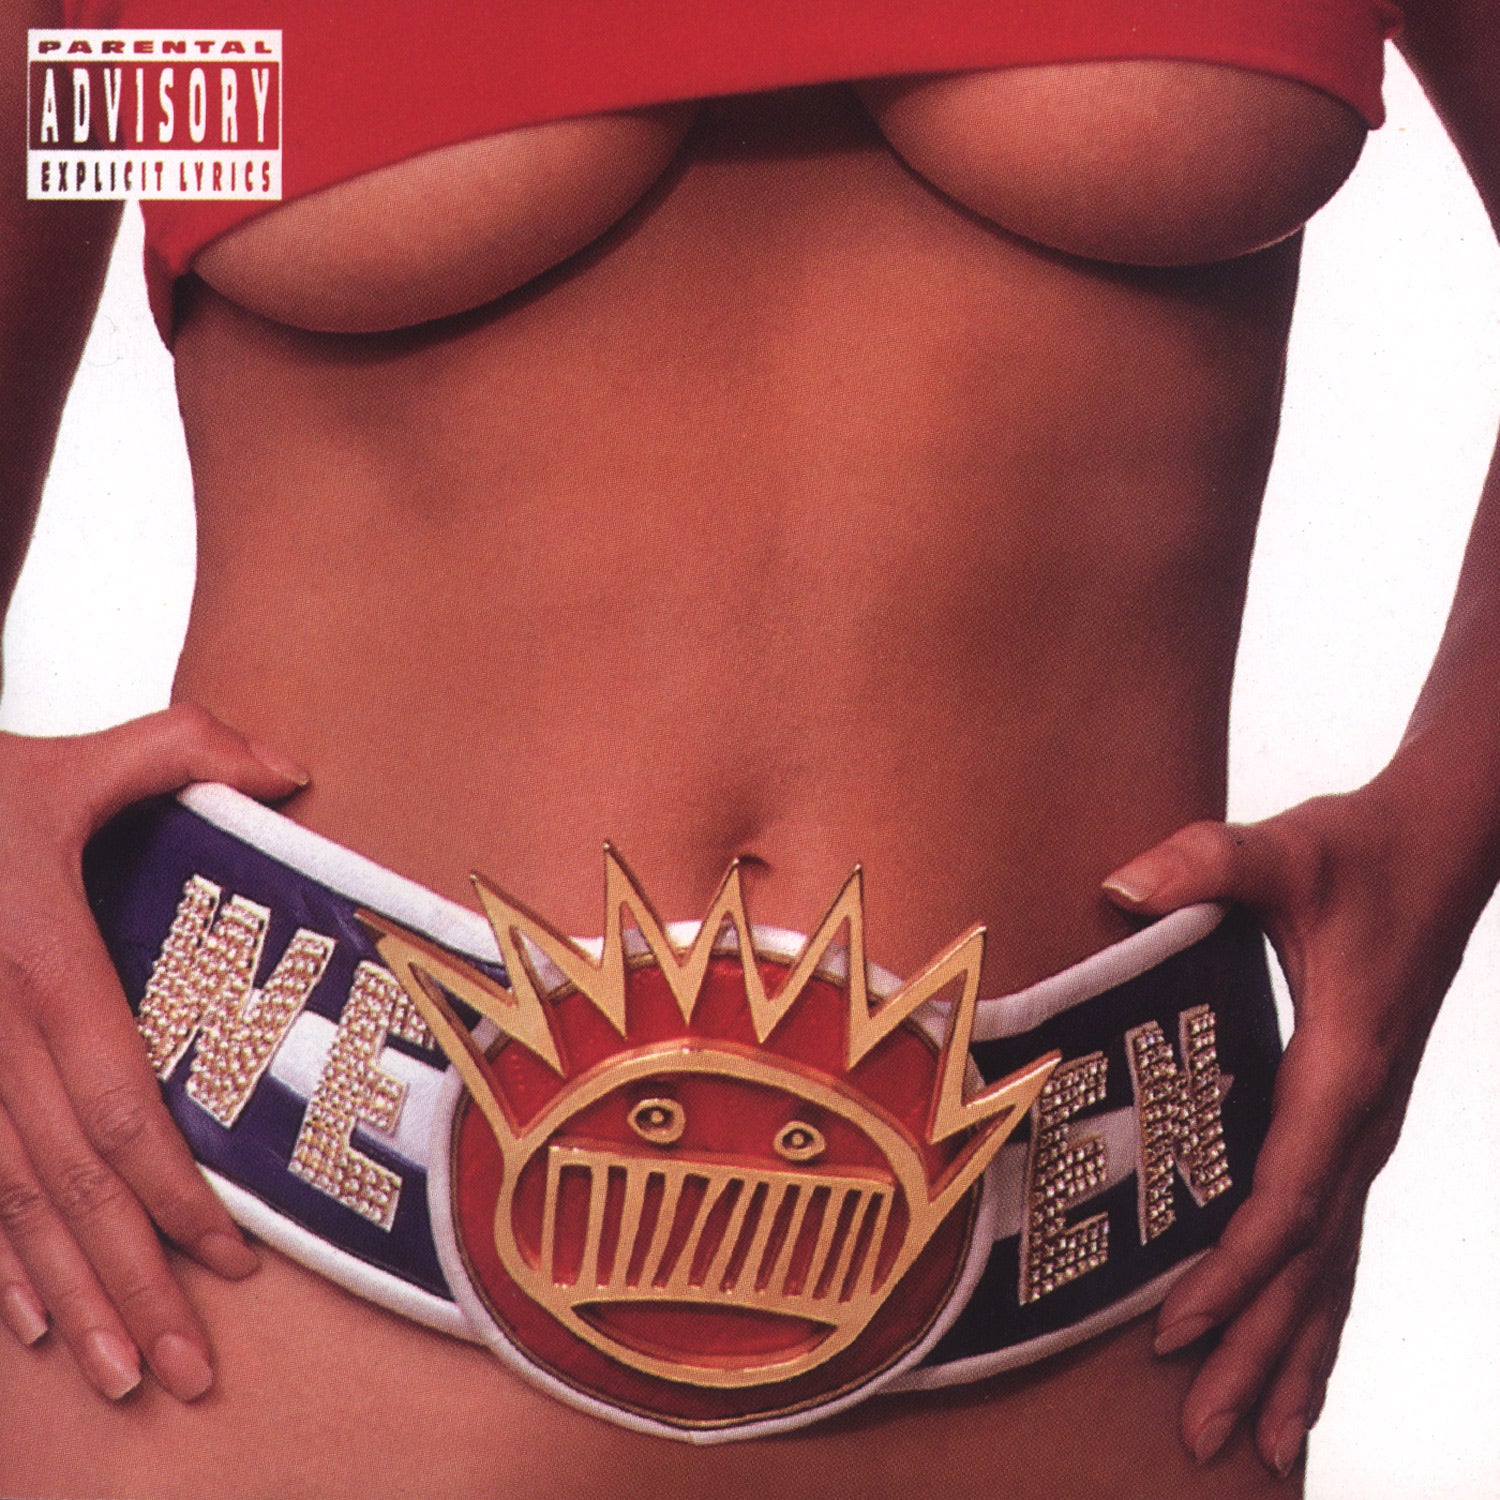 Ween - Chocolate and Cheese (Deluxe Edition): 30th Anniversary Vinyl 3LP